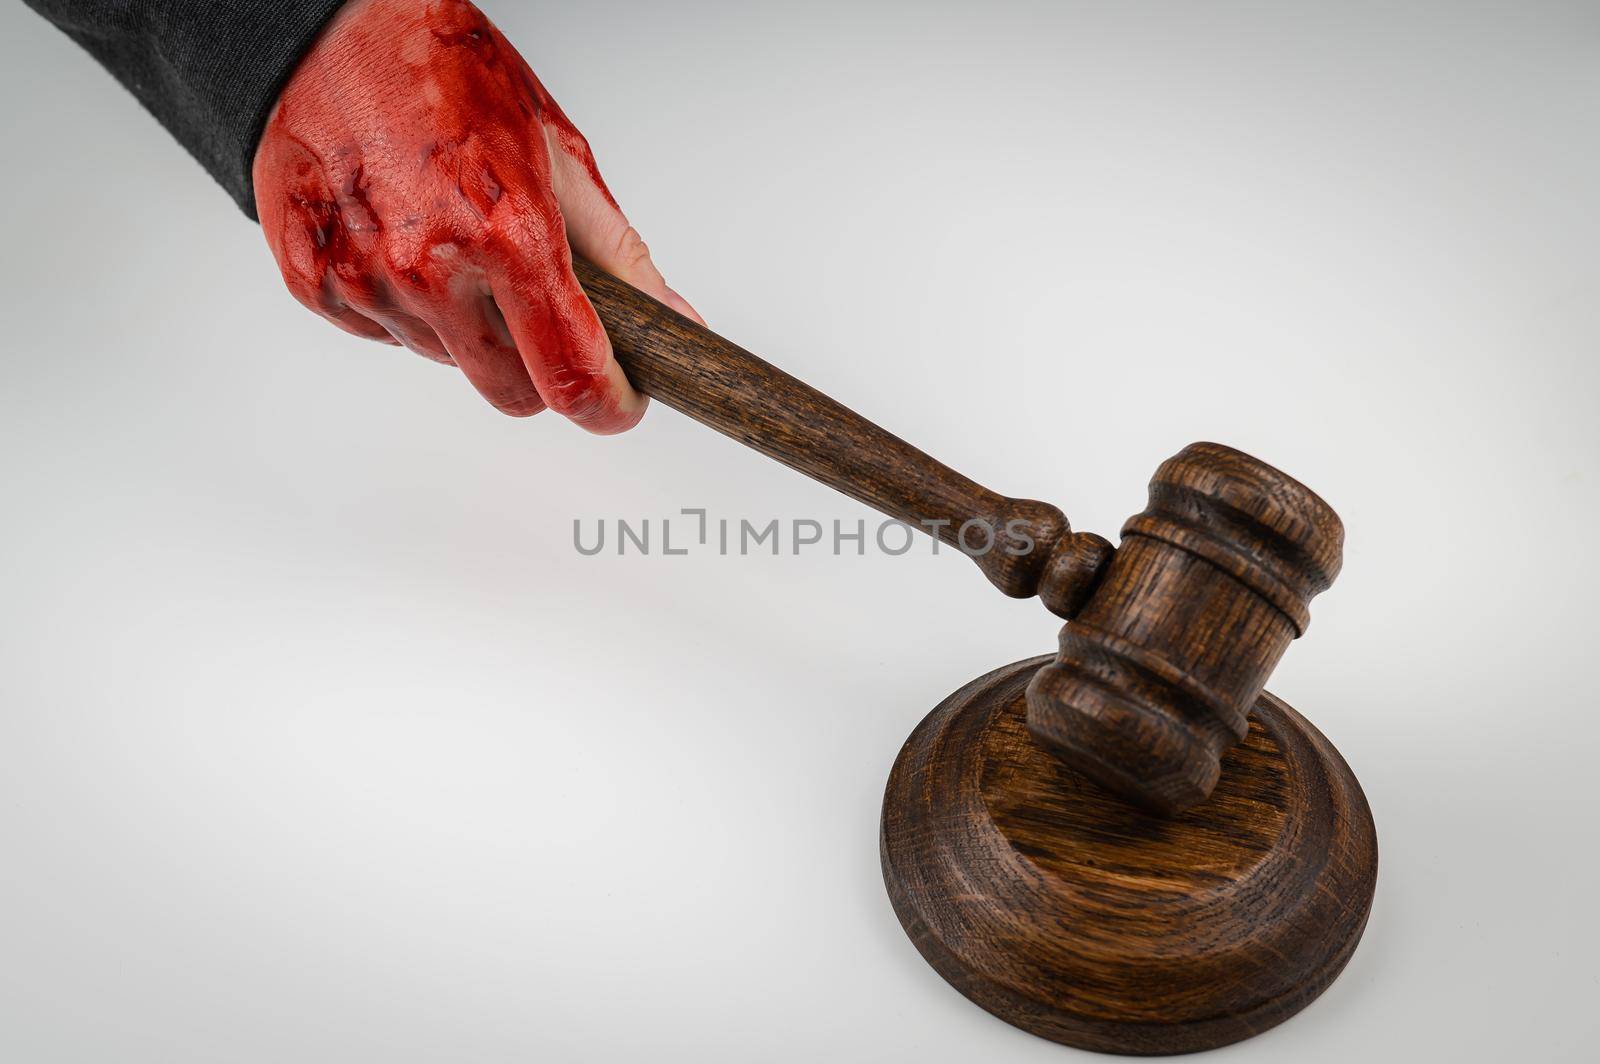 Female judge with bloody hands beats the gavel on a white background. by mrwed54